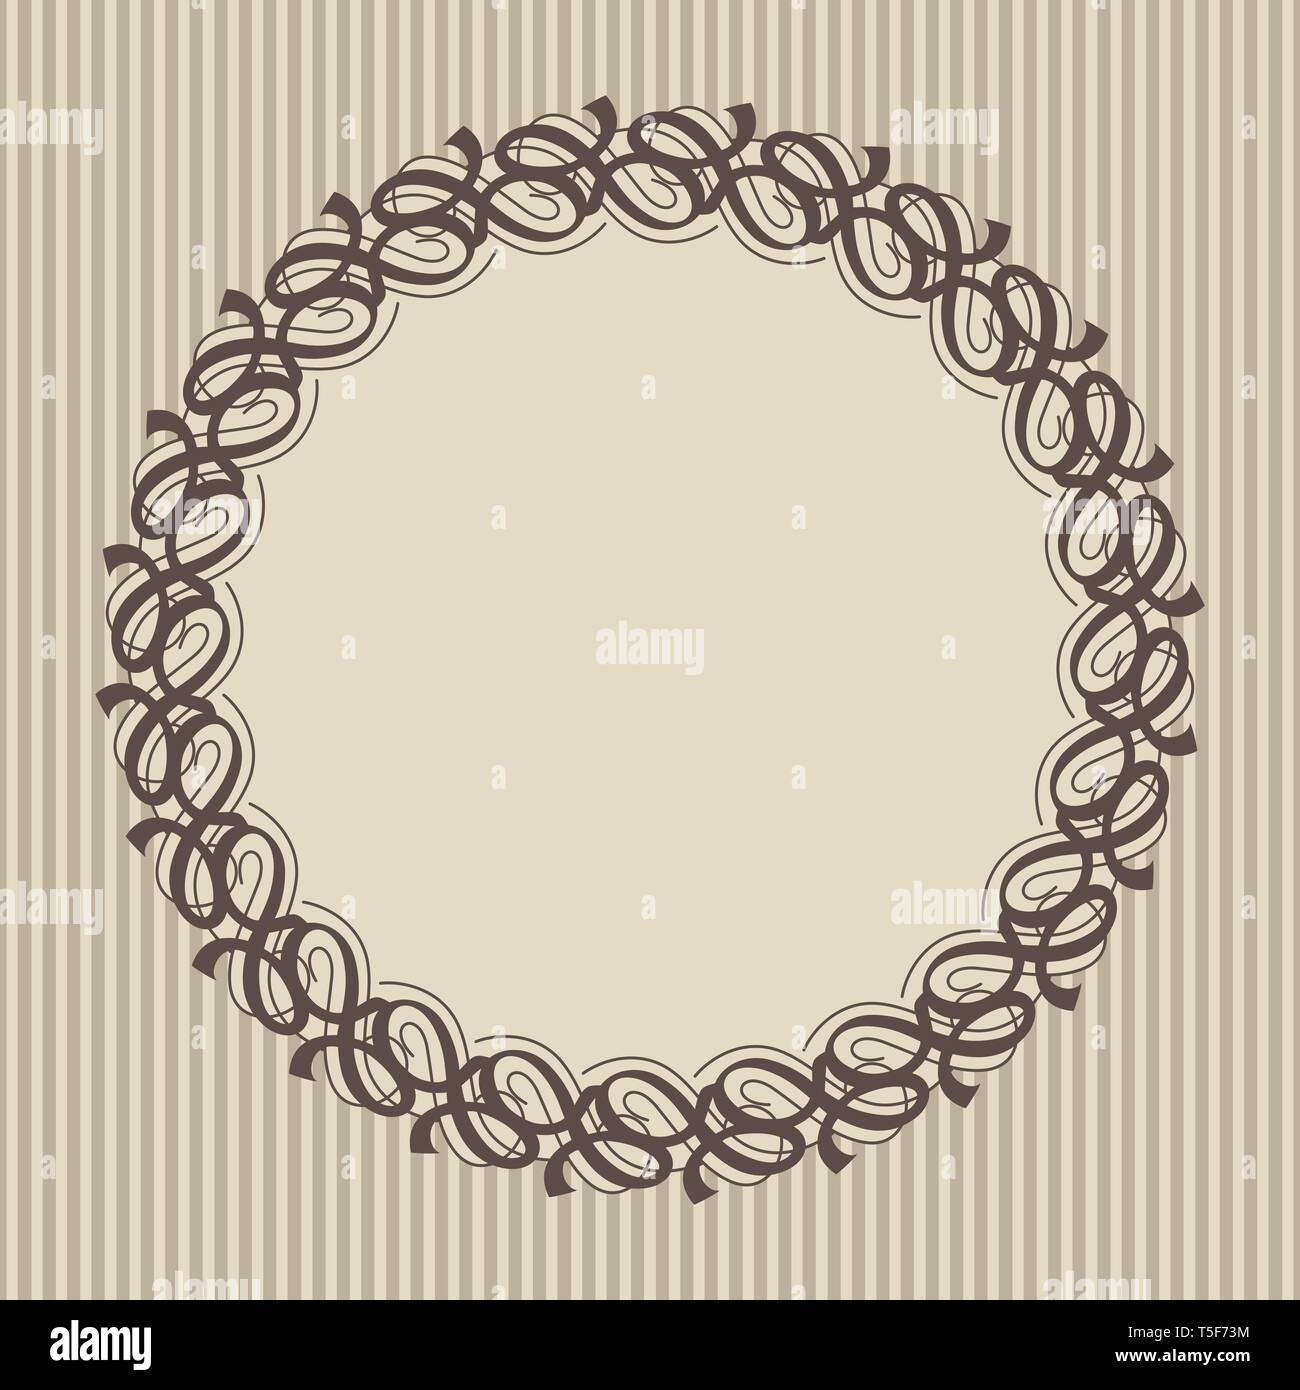 Round frame with decorative elements. Vector illustration Stock Vector